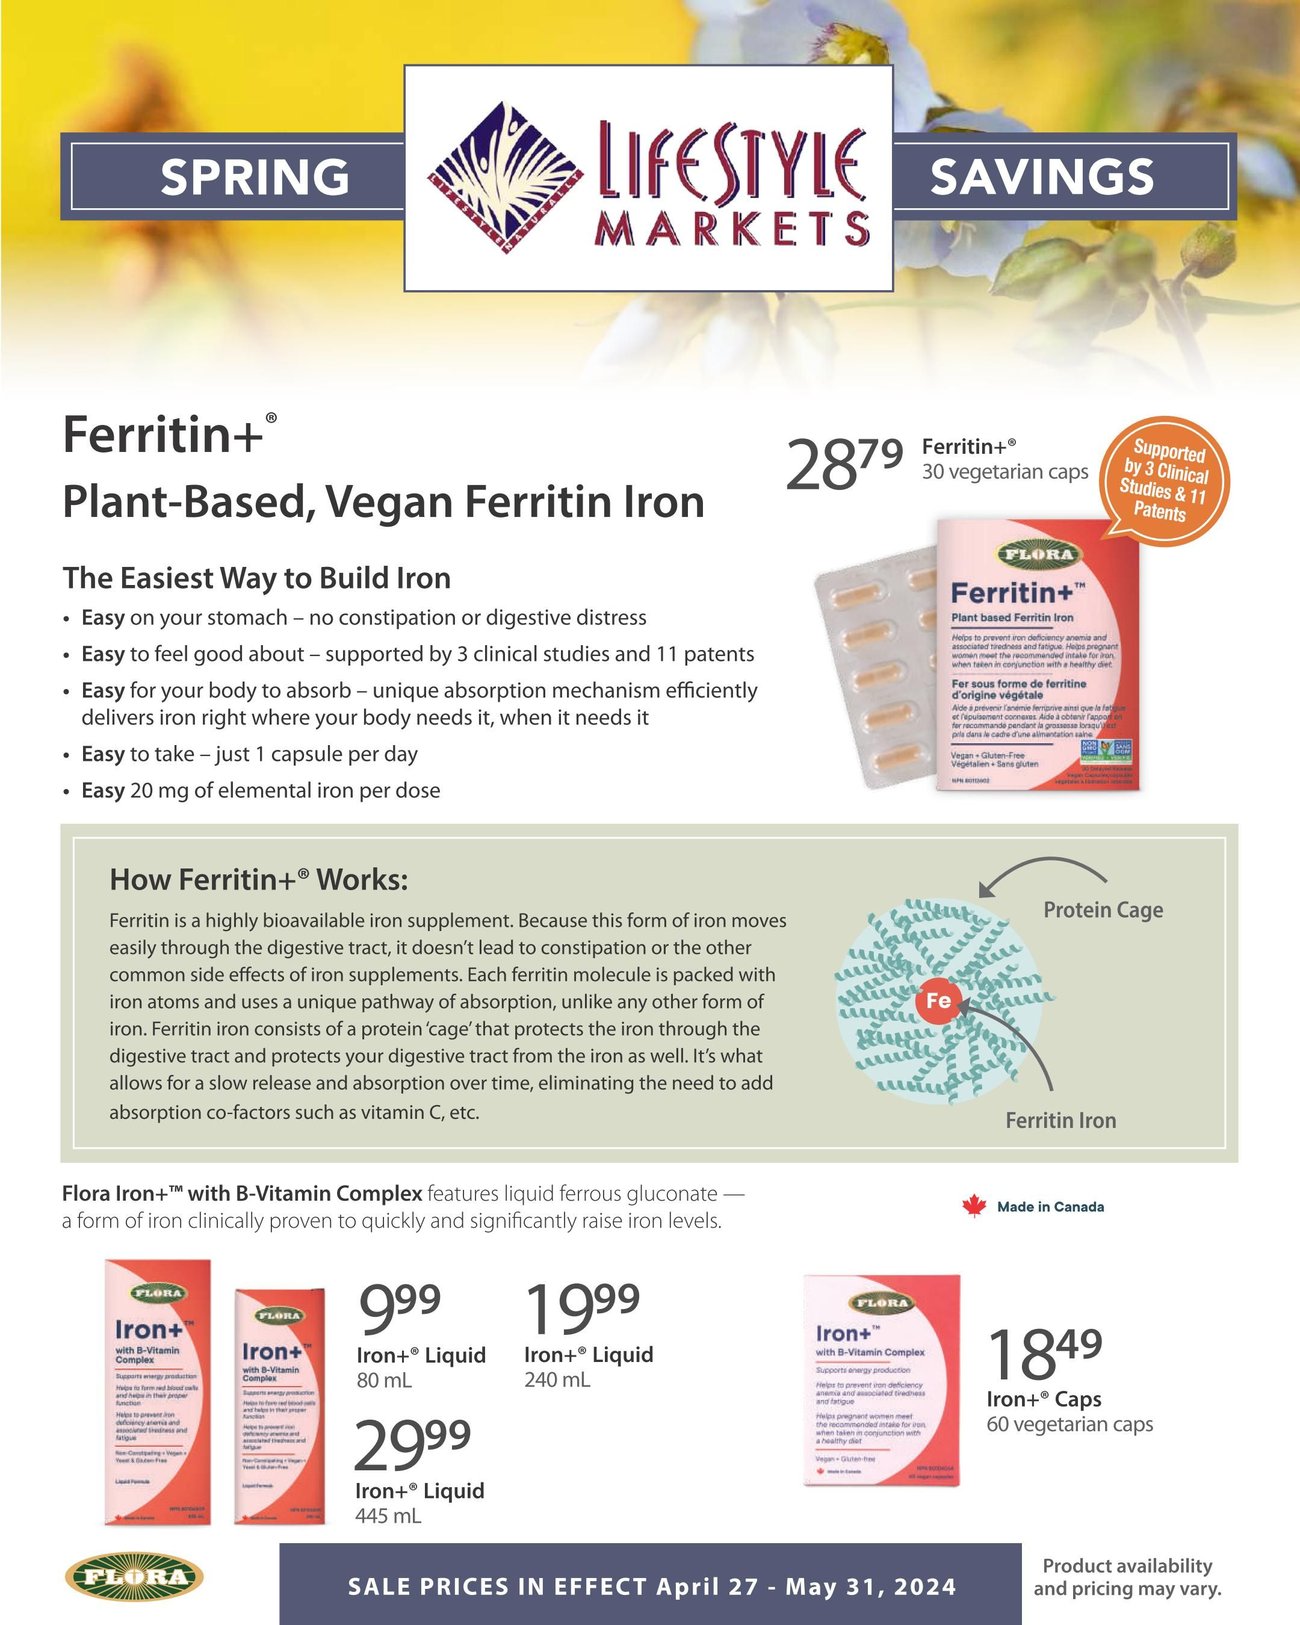 Lifestyle Markets - Monthly Savings - Page 1